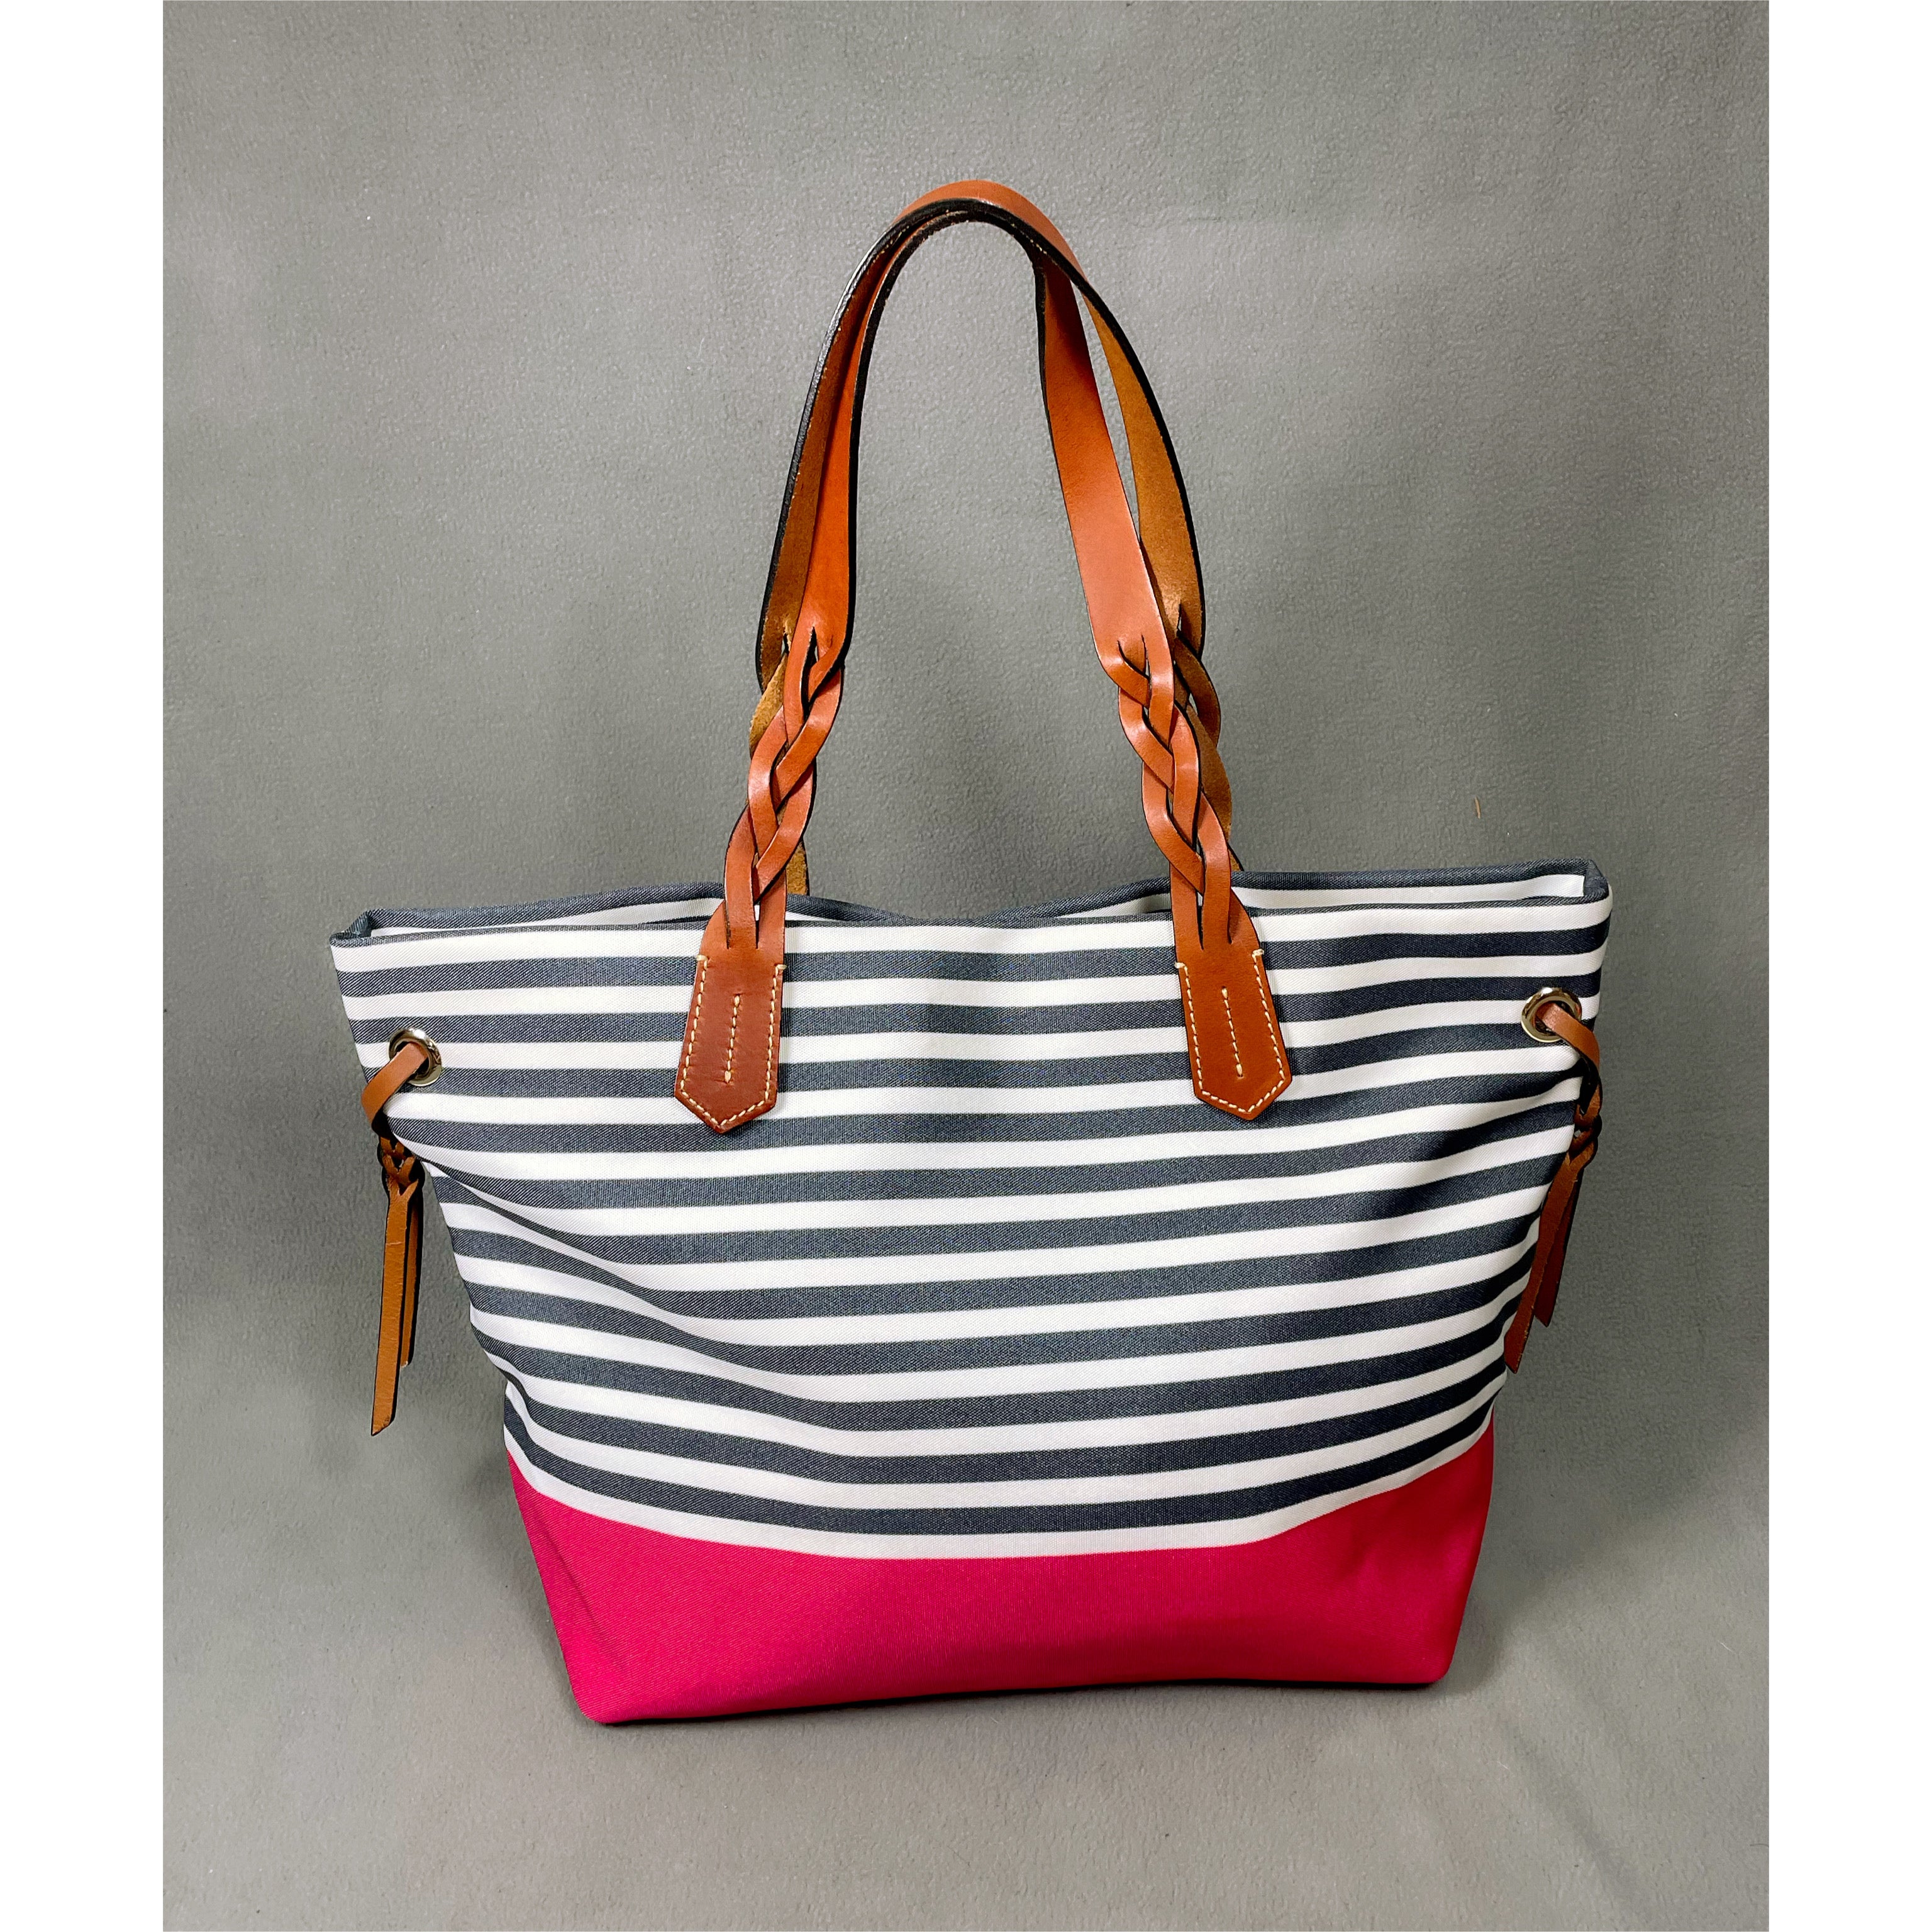 Dooney & Bourke red, white, and blue tote